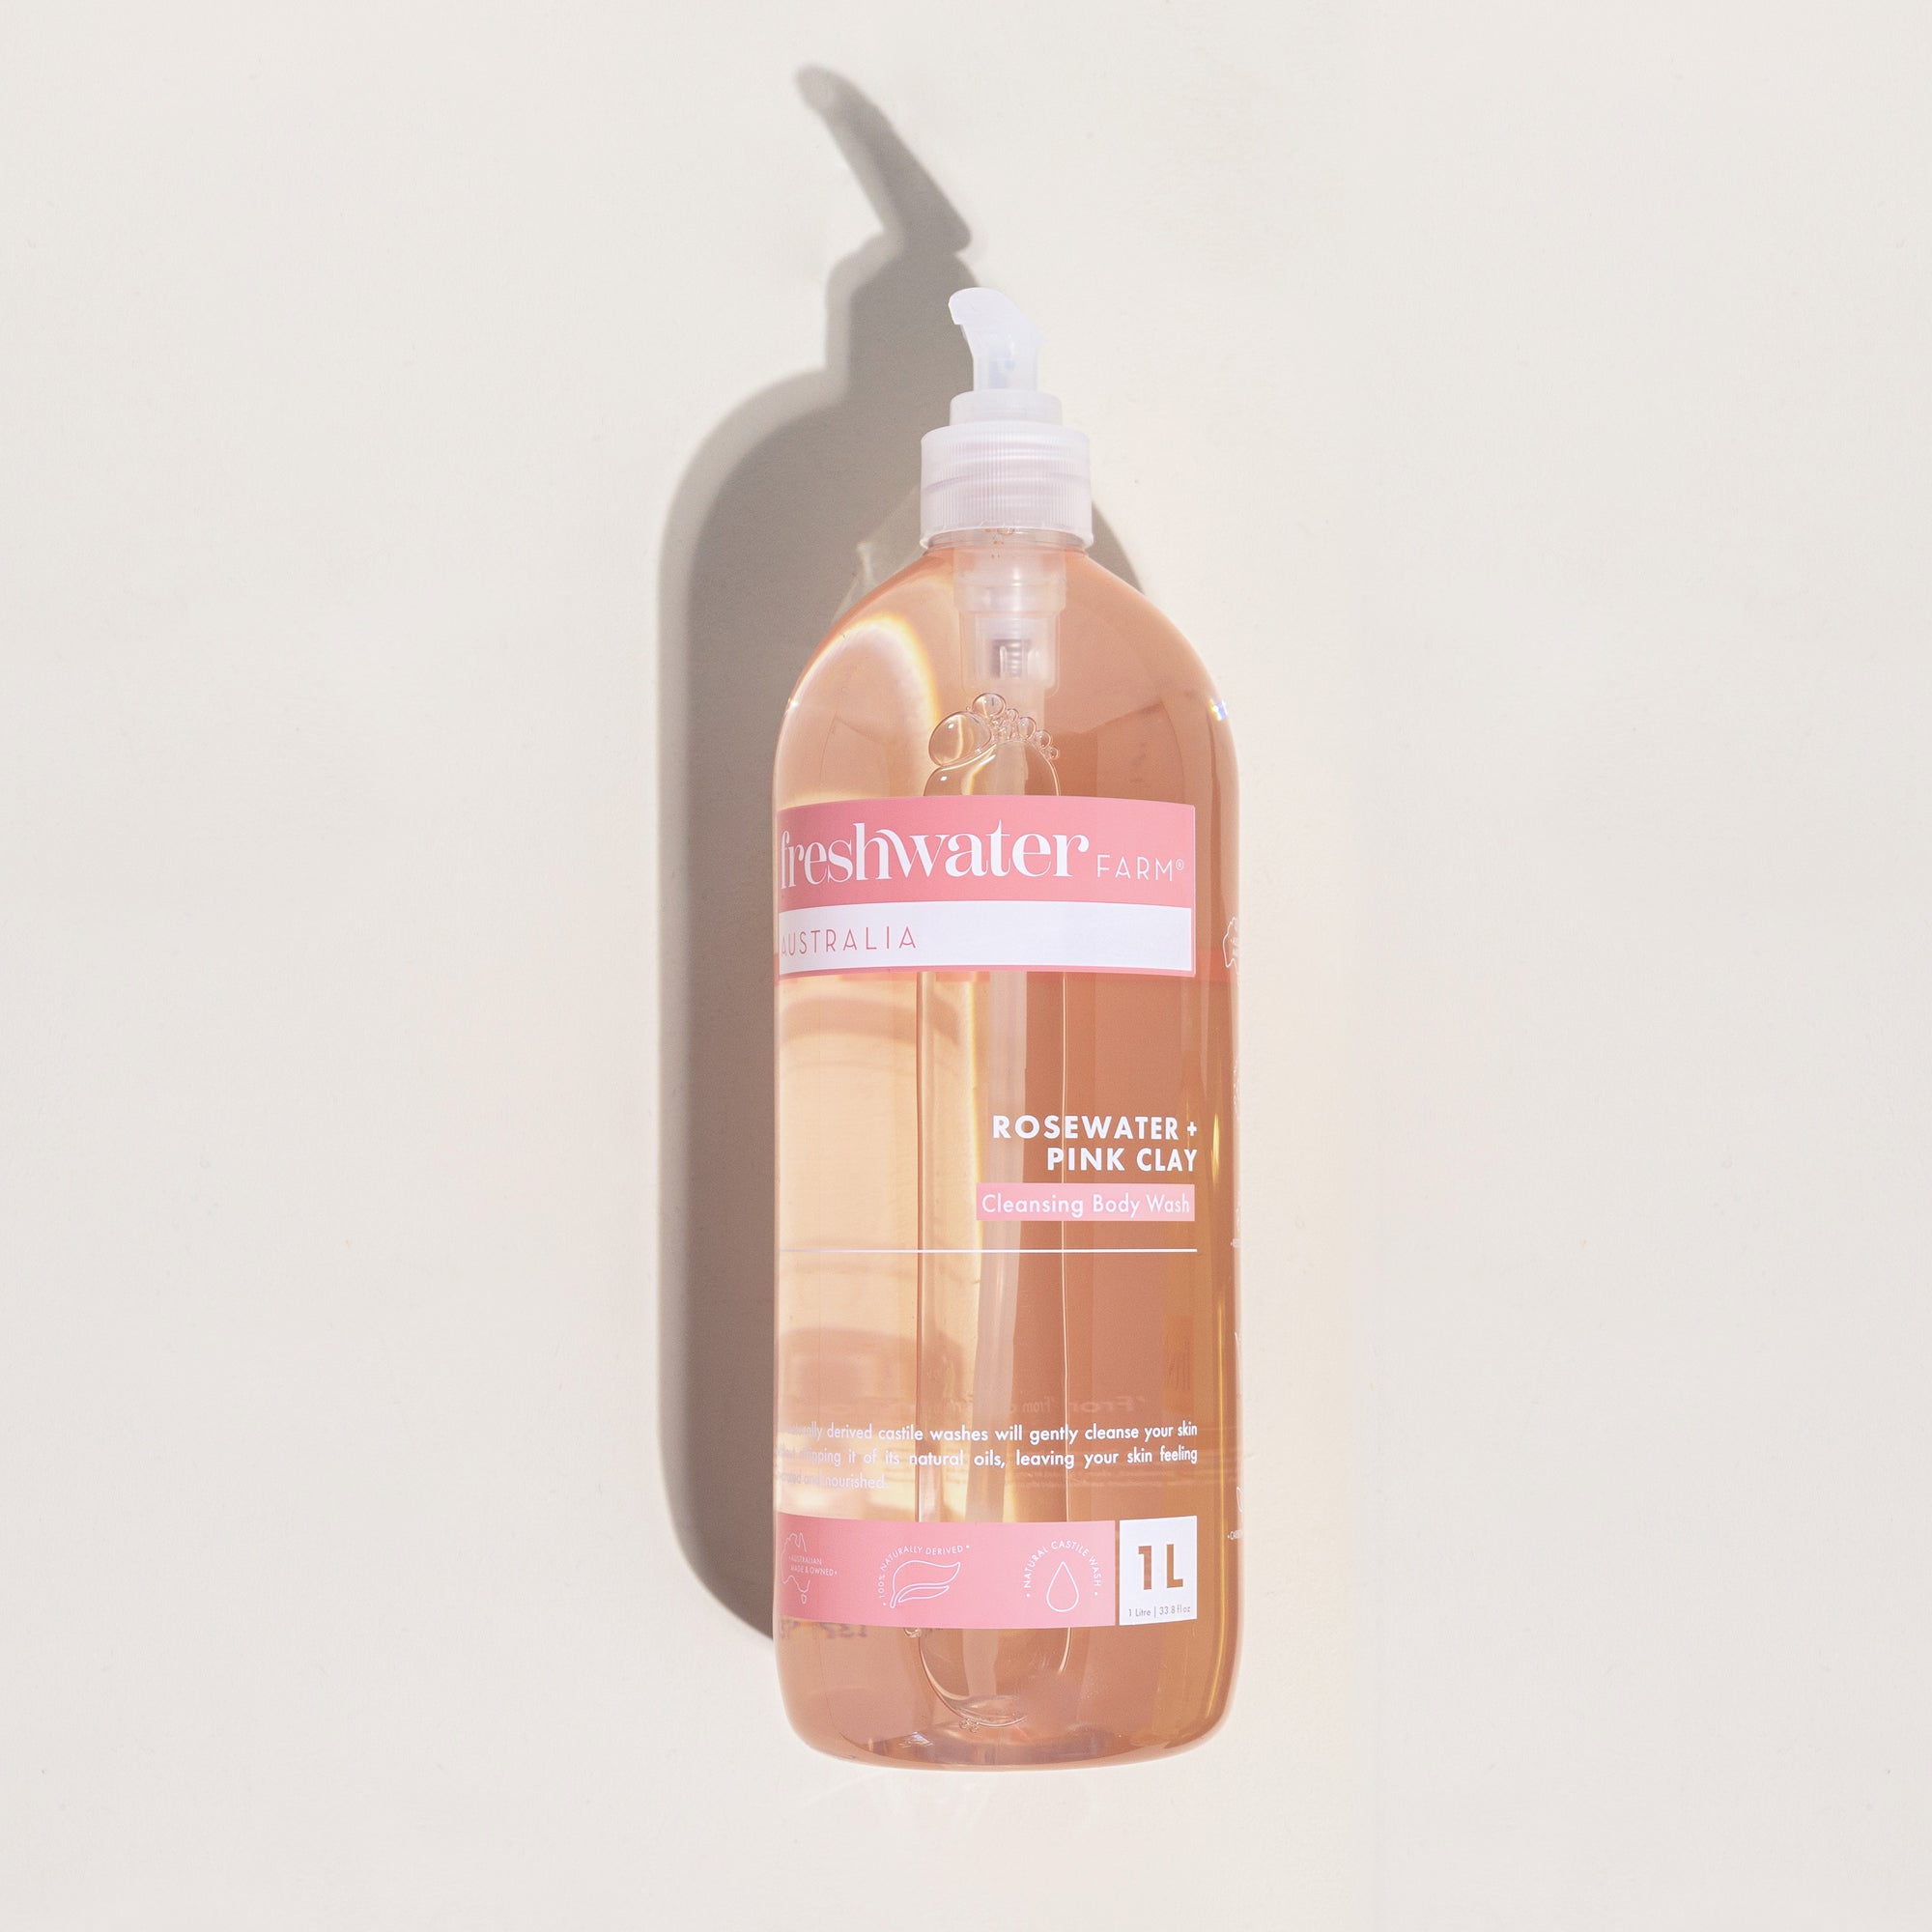 BODY WASH | Cleansing Rosewater + Pink Clay  1 Litre